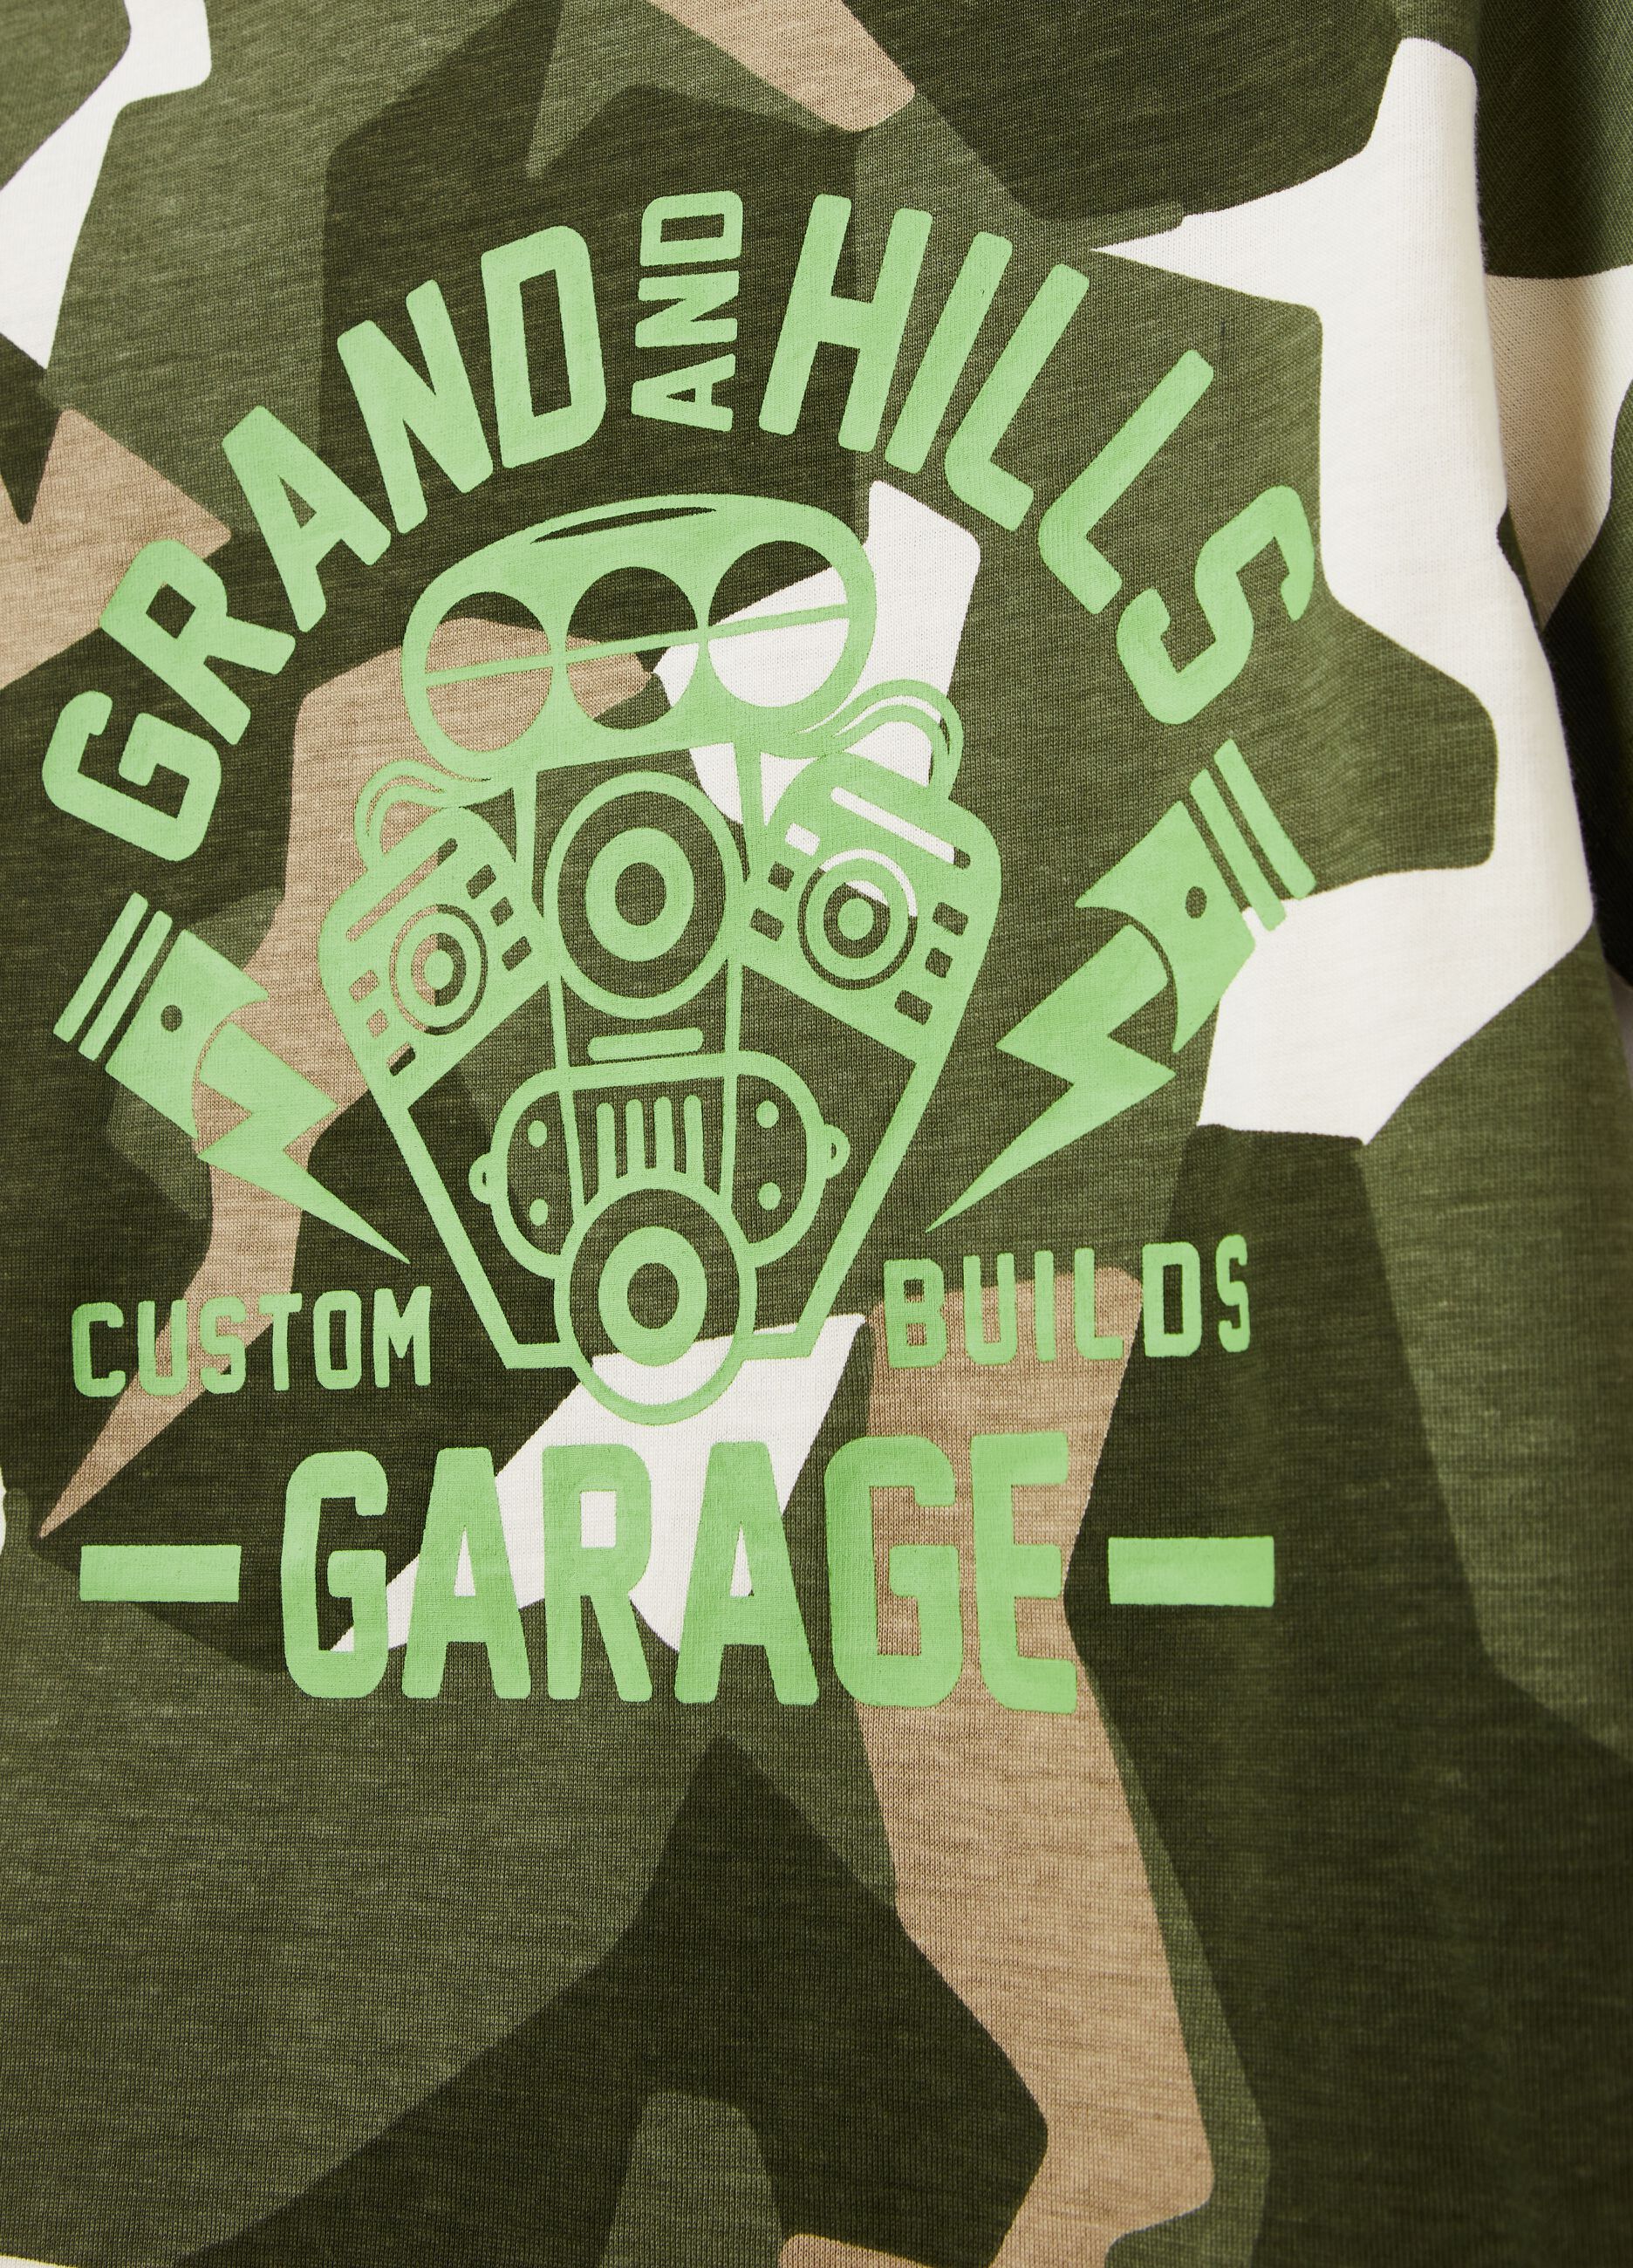 Grand&Hills T-shirt with camouflage print